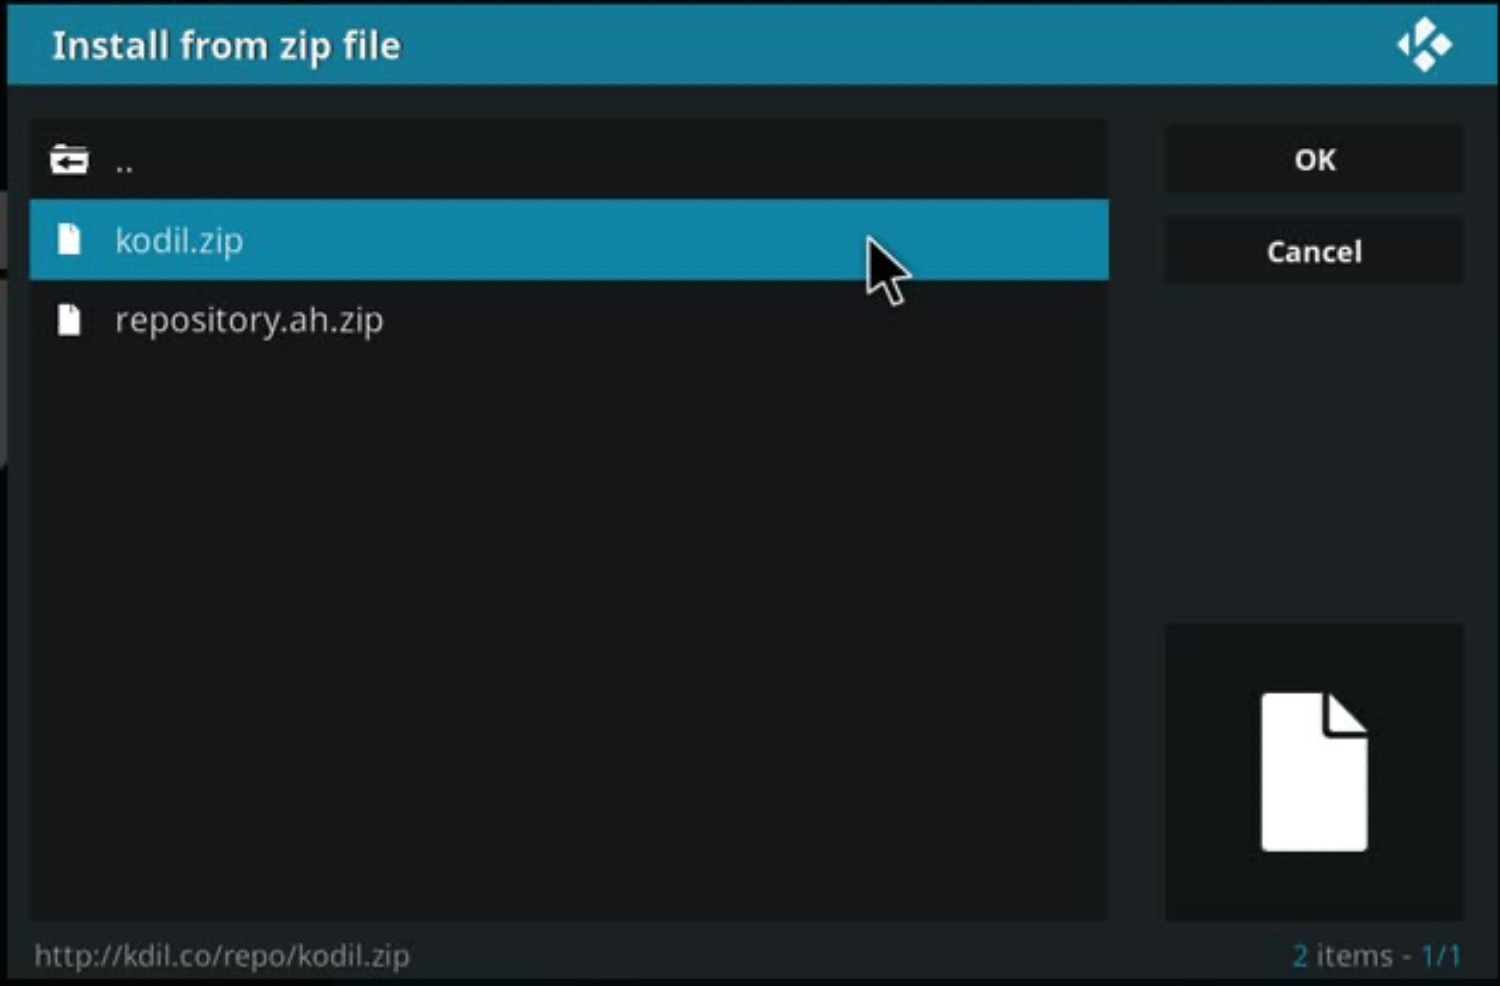 install from zip file